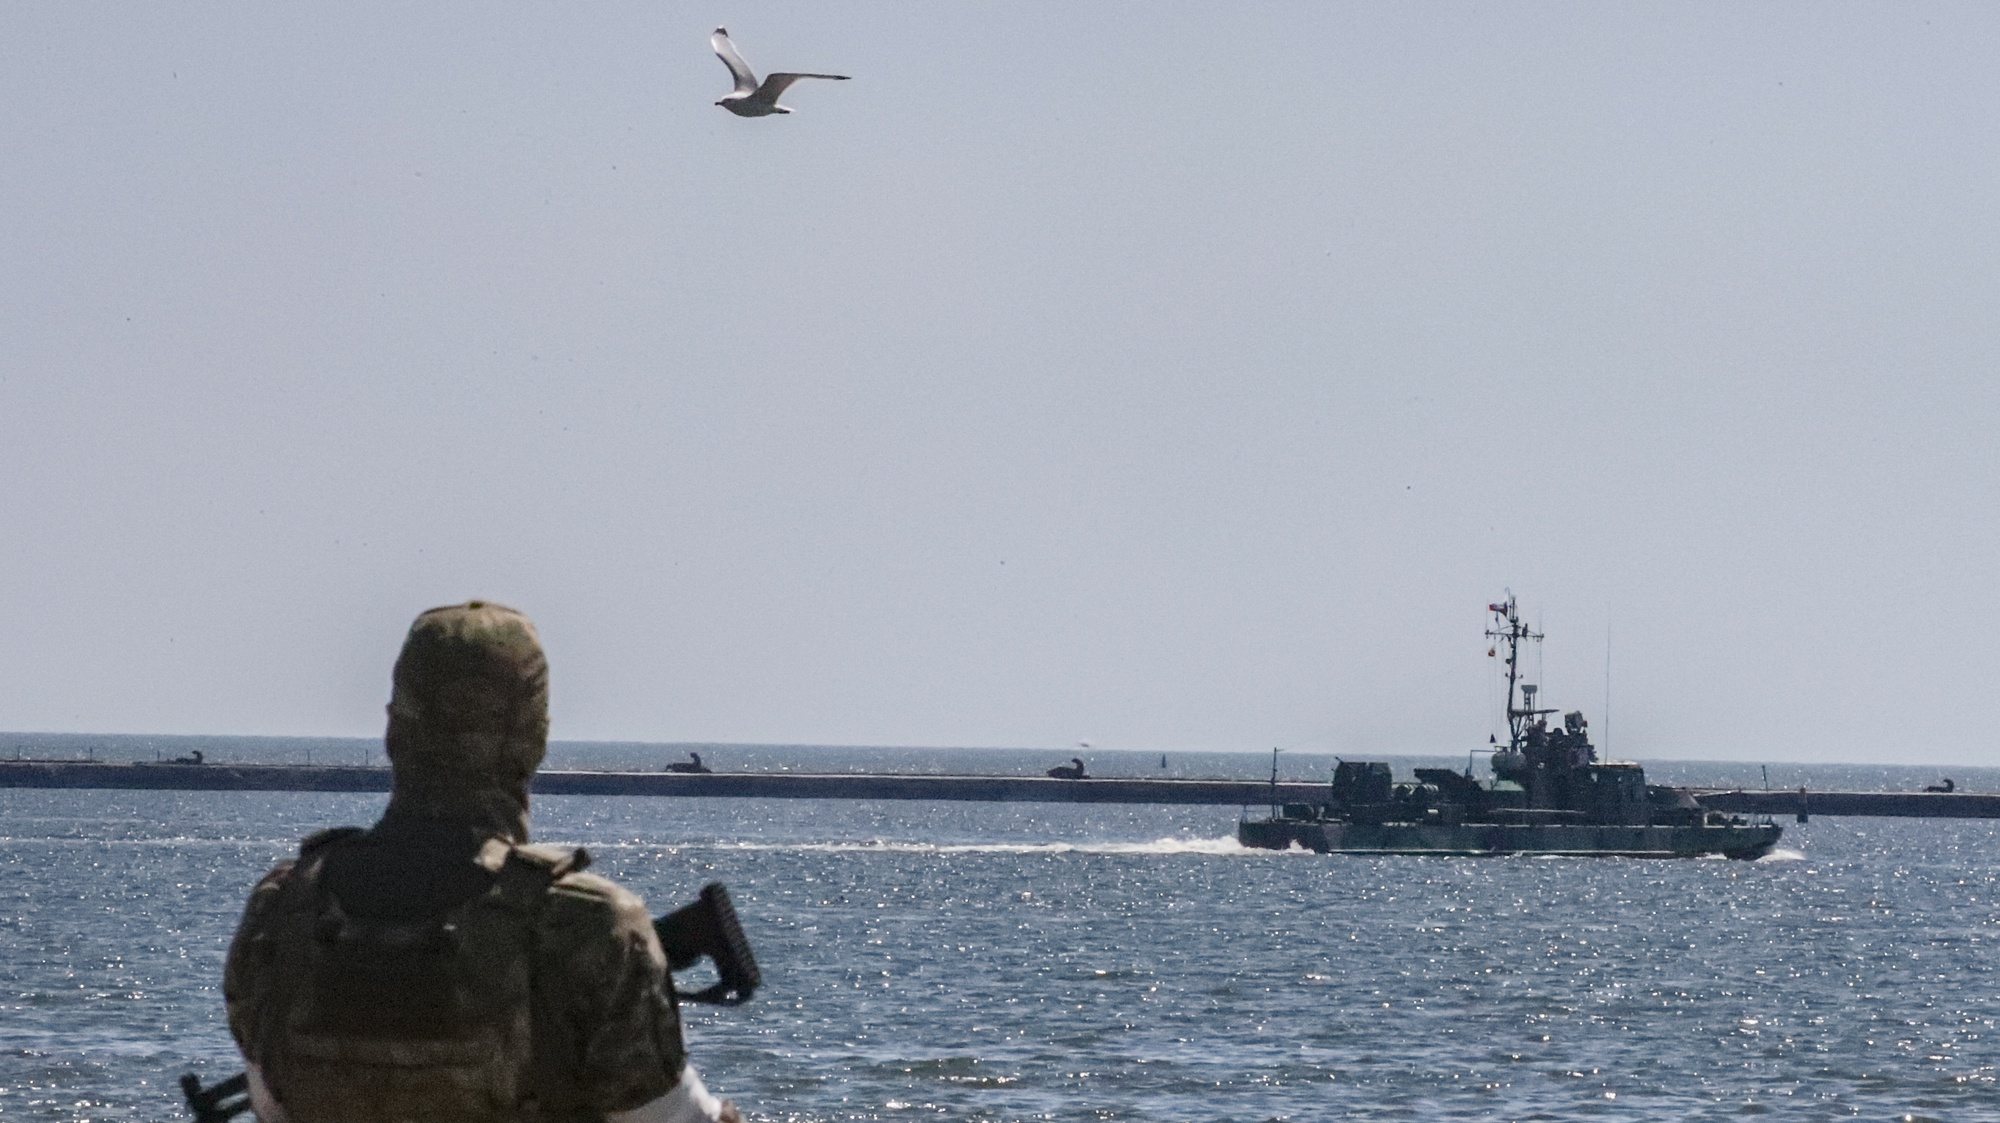 epa10009896 A picture taken during a visit to Mariupol organized by the Russian military shows a Russian navy ship sails in the waters of the cargo sea port of Mariupol, Ukraine, 12 June 2022.  Russian Defense Minister Sergei Shoigu said the seaports of Mariupol and Berdyansk in Ukraine are operating normally and are ready to ship grain.  According to Shoigu, demining of the Mariupol seaport has been completed and it is functioning normally and has received the first cargo ships. Shoigu added ‘In Mariupol, water and electricity supply to residential areas are gradually being restored, streets are being cleared, the first social facilities have begun to function.’ On 24 February Russian troops entered Ukrainian territory starting a conflict that has provoked destruction and a humanitarian crisis. According to the UNHCR, more than six million refugees have fled Ukraine, and a further 7.7 million people have been displaced internally within Ukraine since.  EPA/SERGEI ILNITSKY